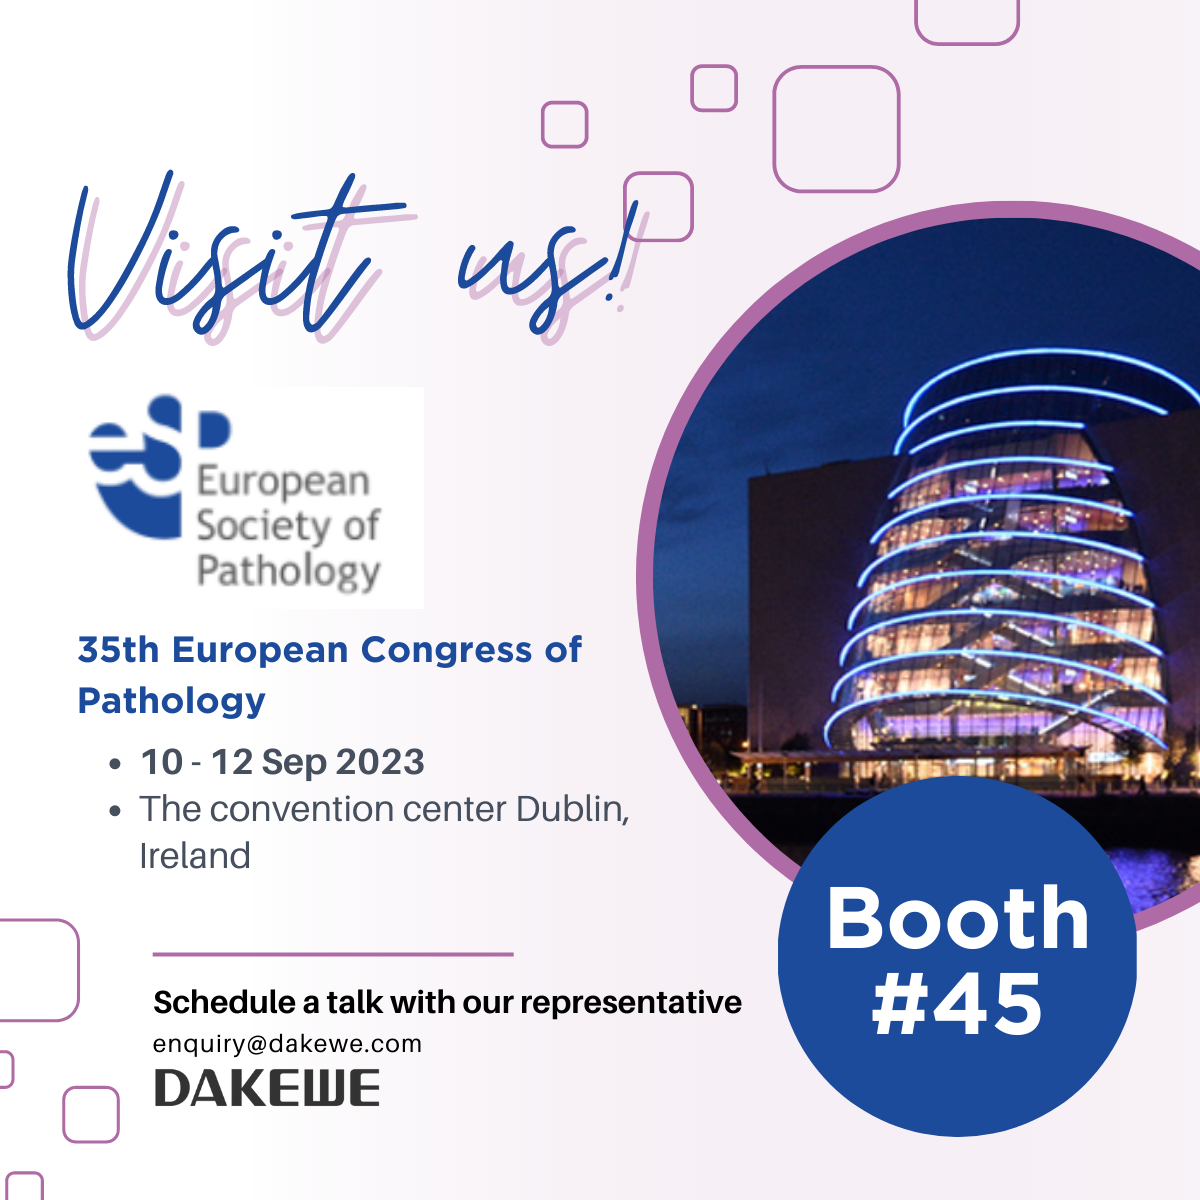 See you next week! Witness Dakewe new product launch in the US and in Ireland!